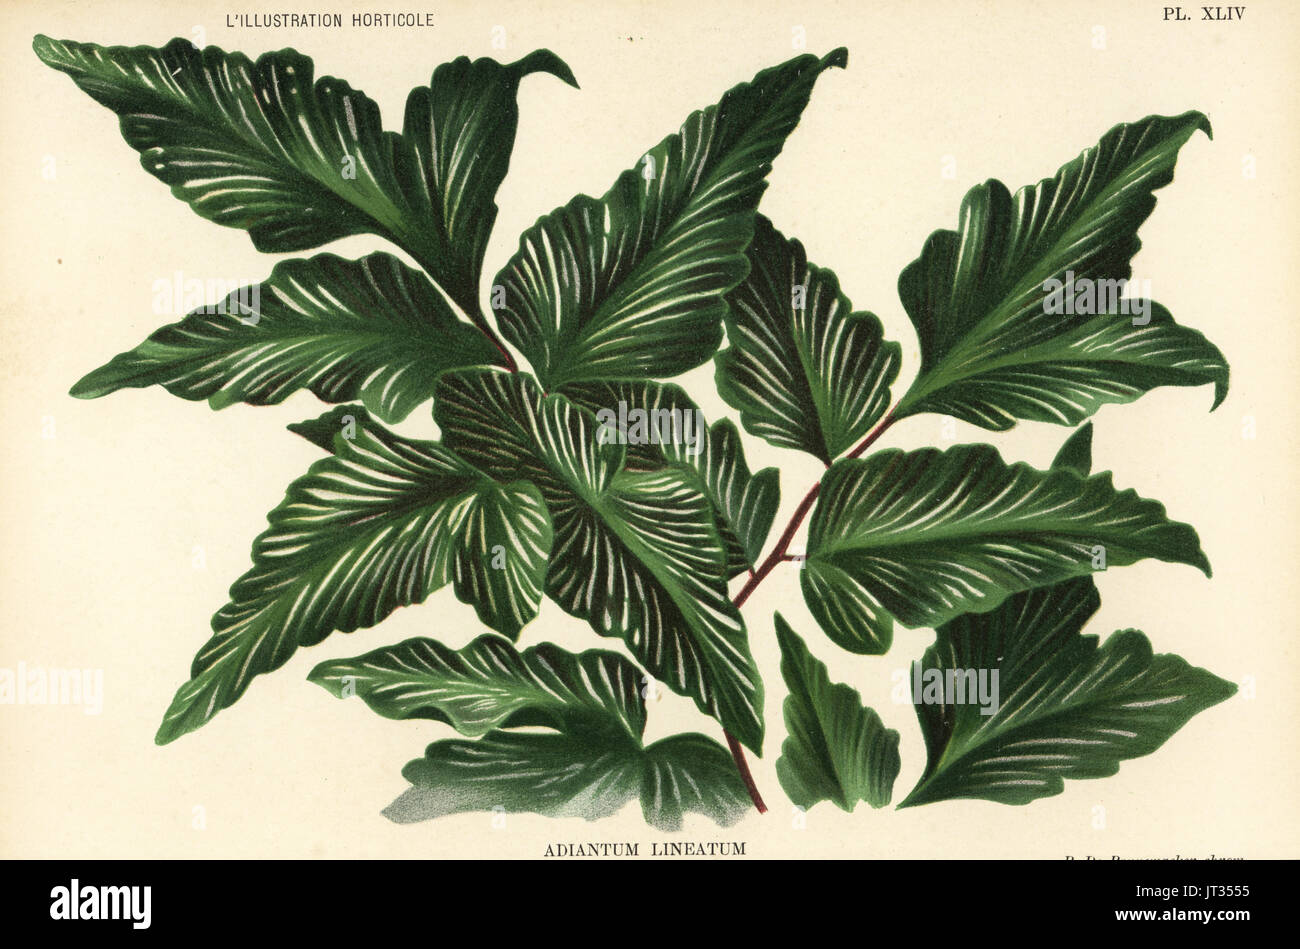 Unknown fern species, Adiantum lineatum. Chromolithograph by Pieter de Pannemaeker after an illustration by A. Goossens from Jean Linden's l'Illustration Horticole, Brussels, 1895. Stock Photo